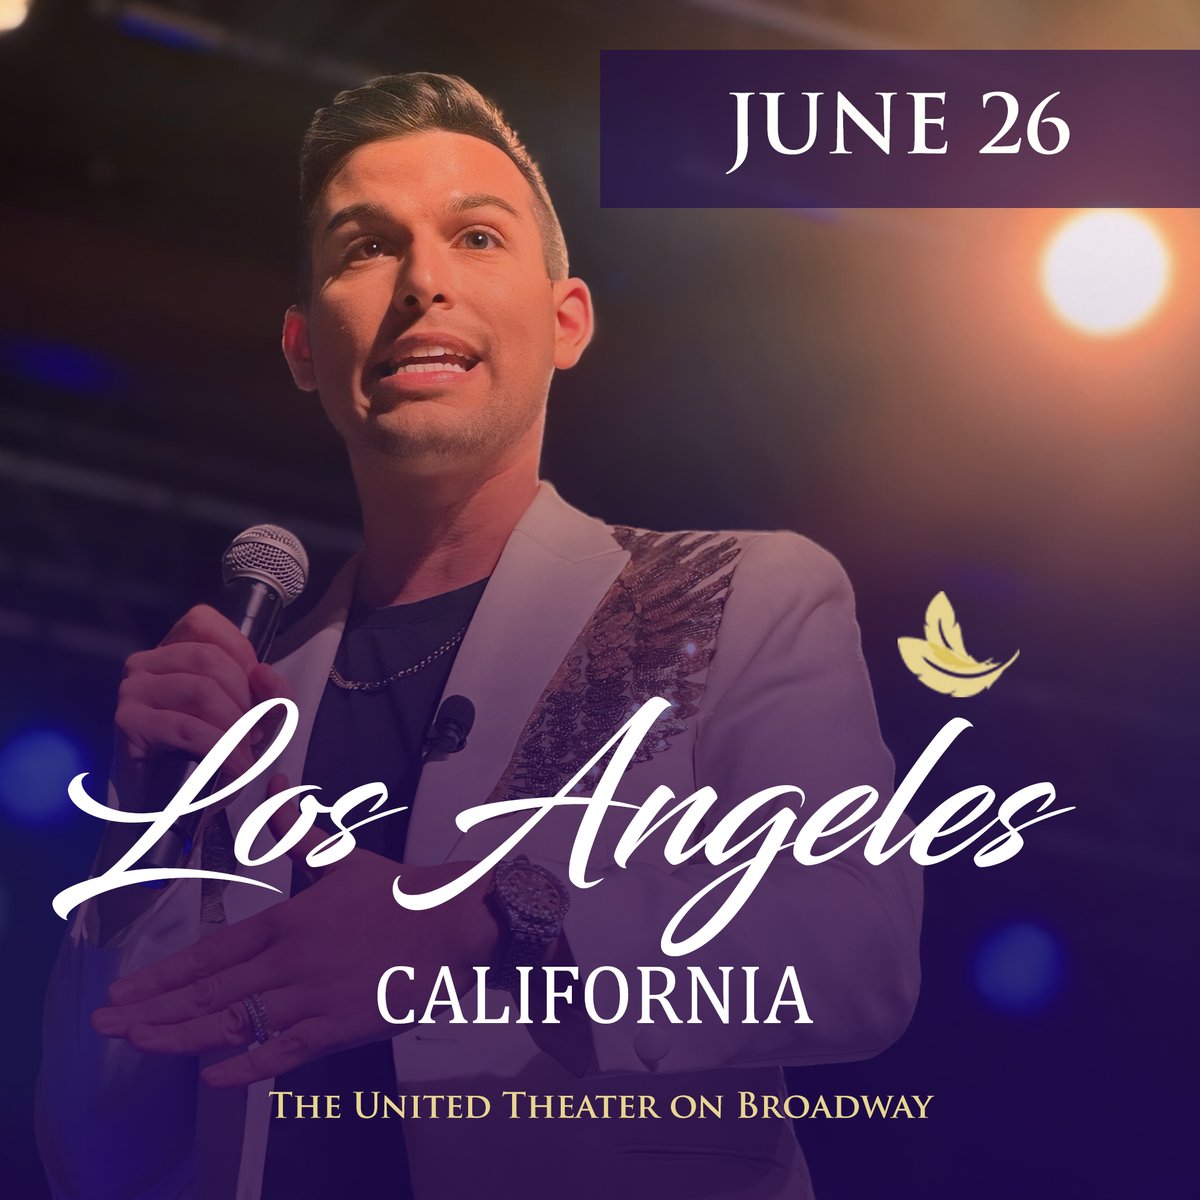 📢 Join me, Los Angeles, for an incredible night at The United Theater on Broadway on June 26th! I'm excited to deliver messages from spirit. Make sure to grab your seat by visiting MeetMattFraser.com